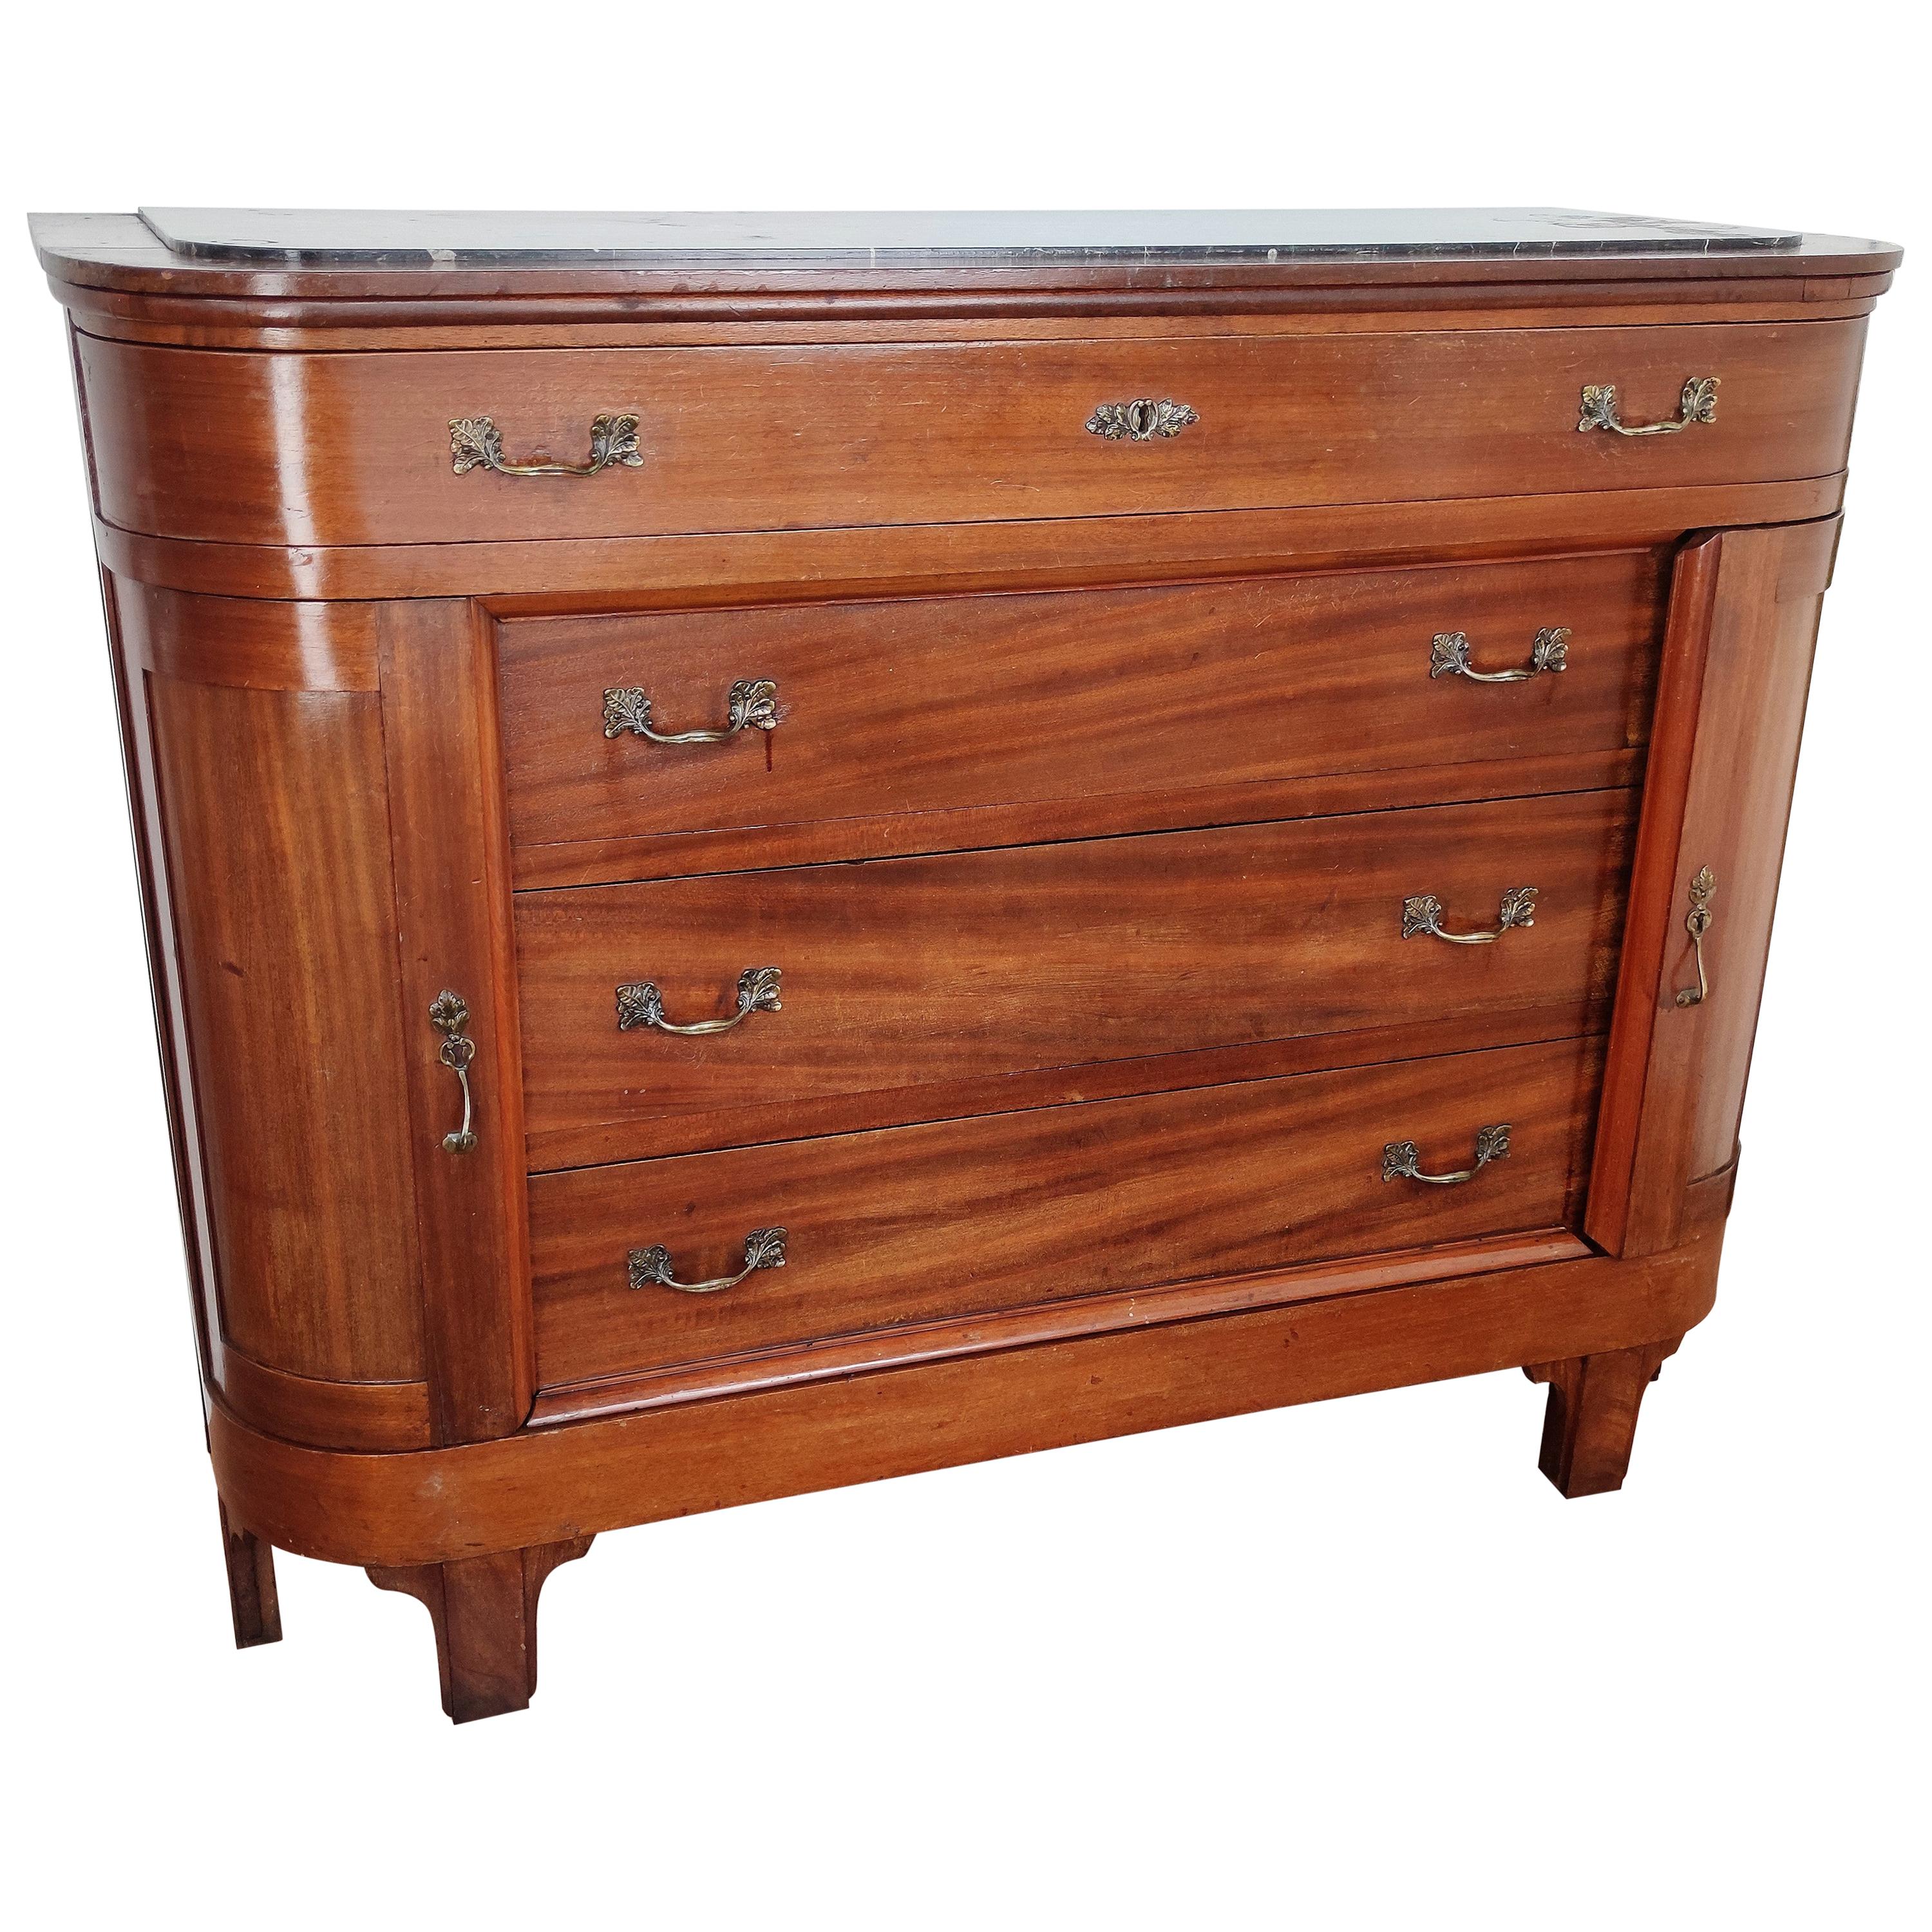 Antique Italian Walnut, Brass and Marble-Top Chest of Drawers Commode Credenza For Sale